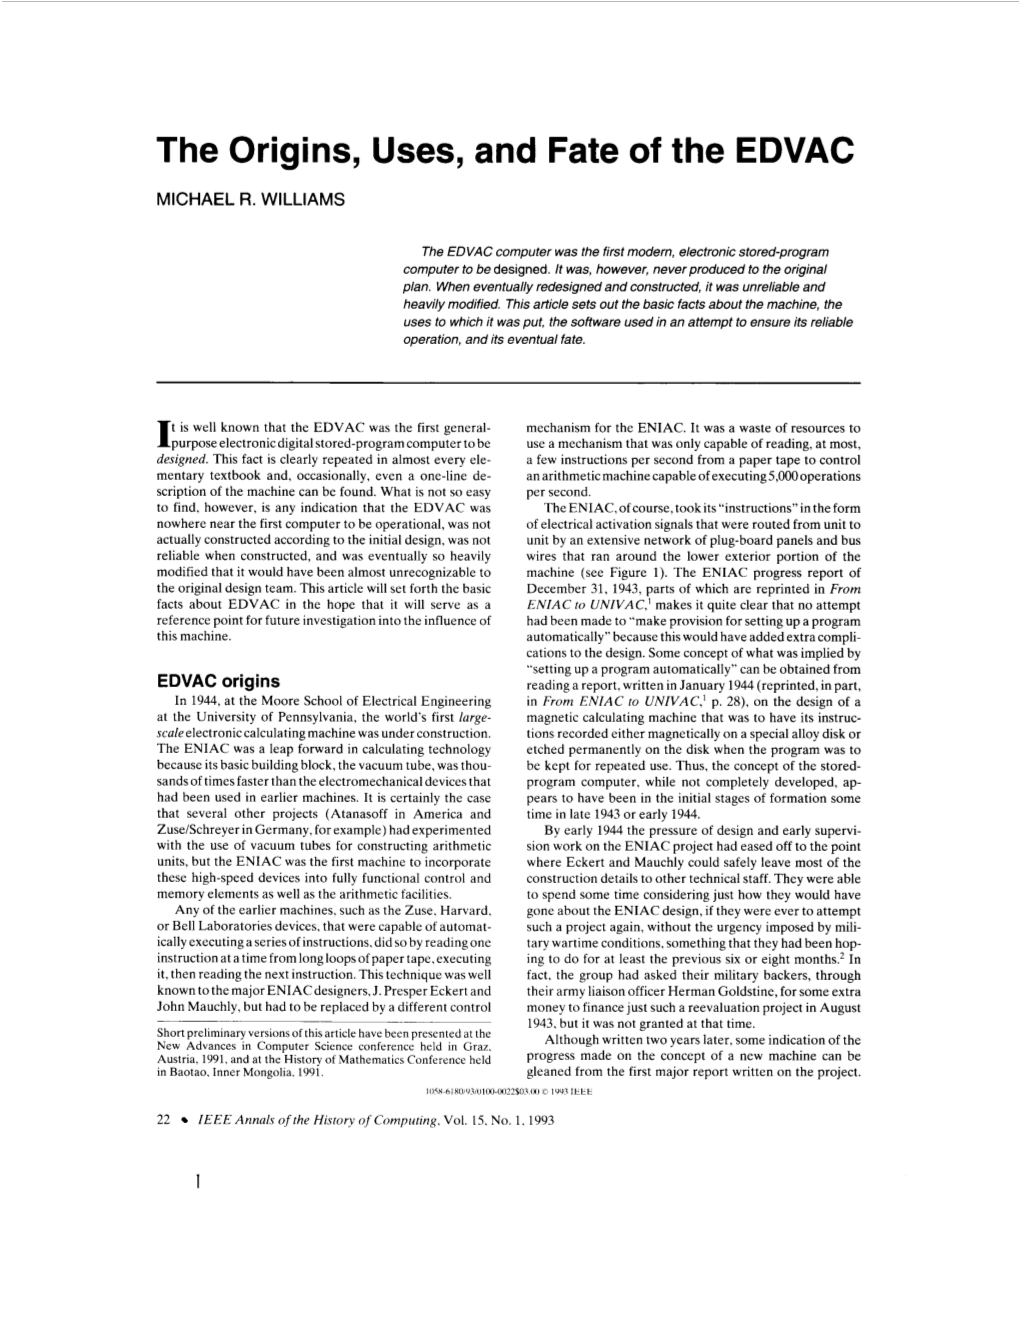 The Origins, Uses, and Fate of the EDVAC